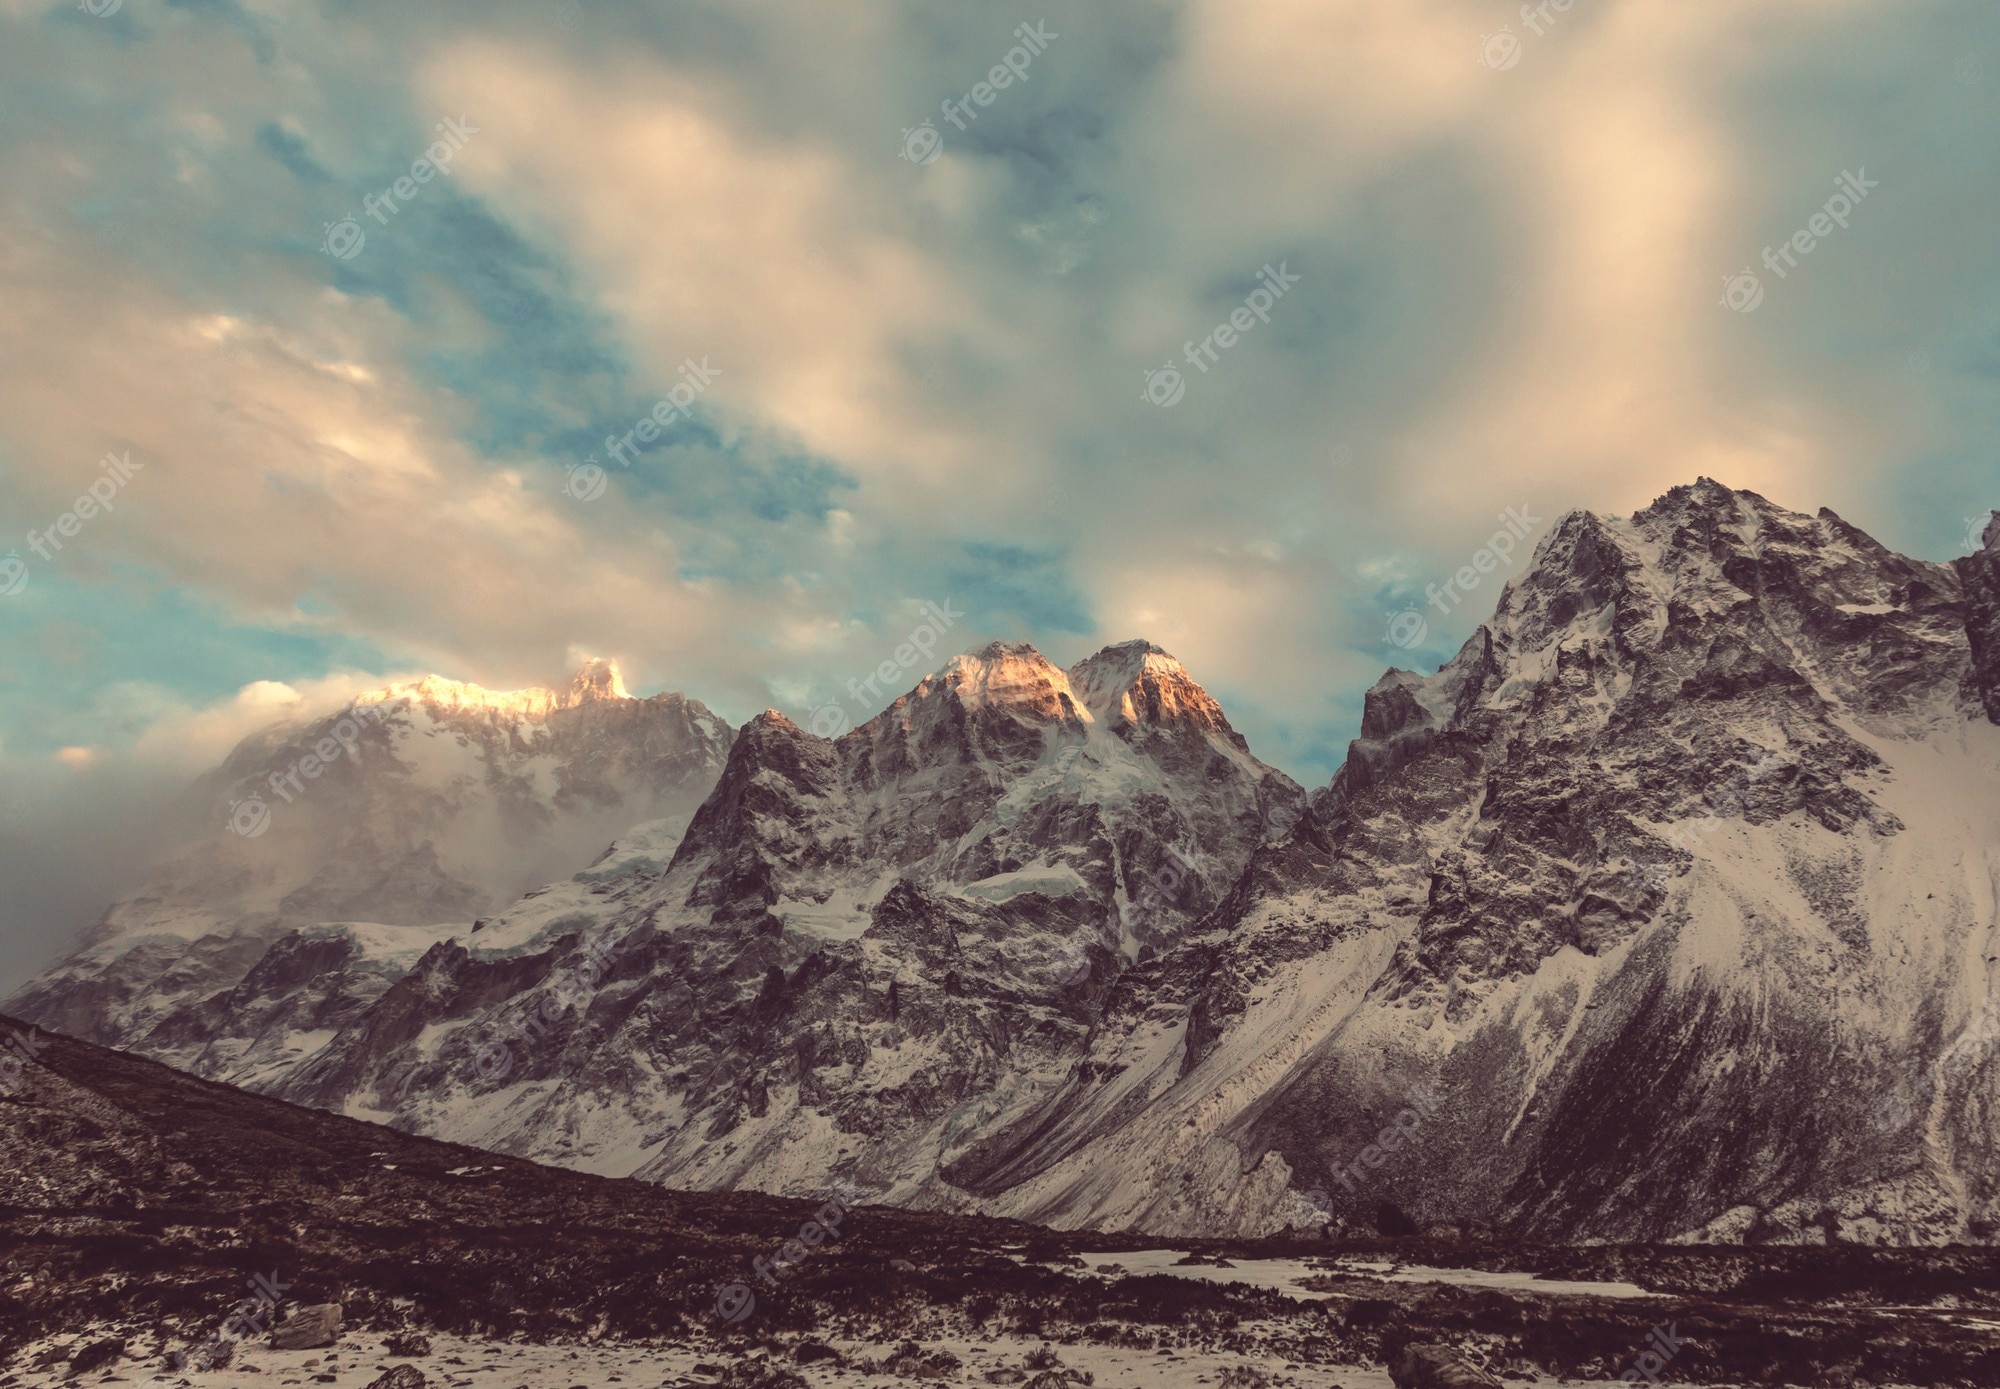 Cool Mountain Background Image